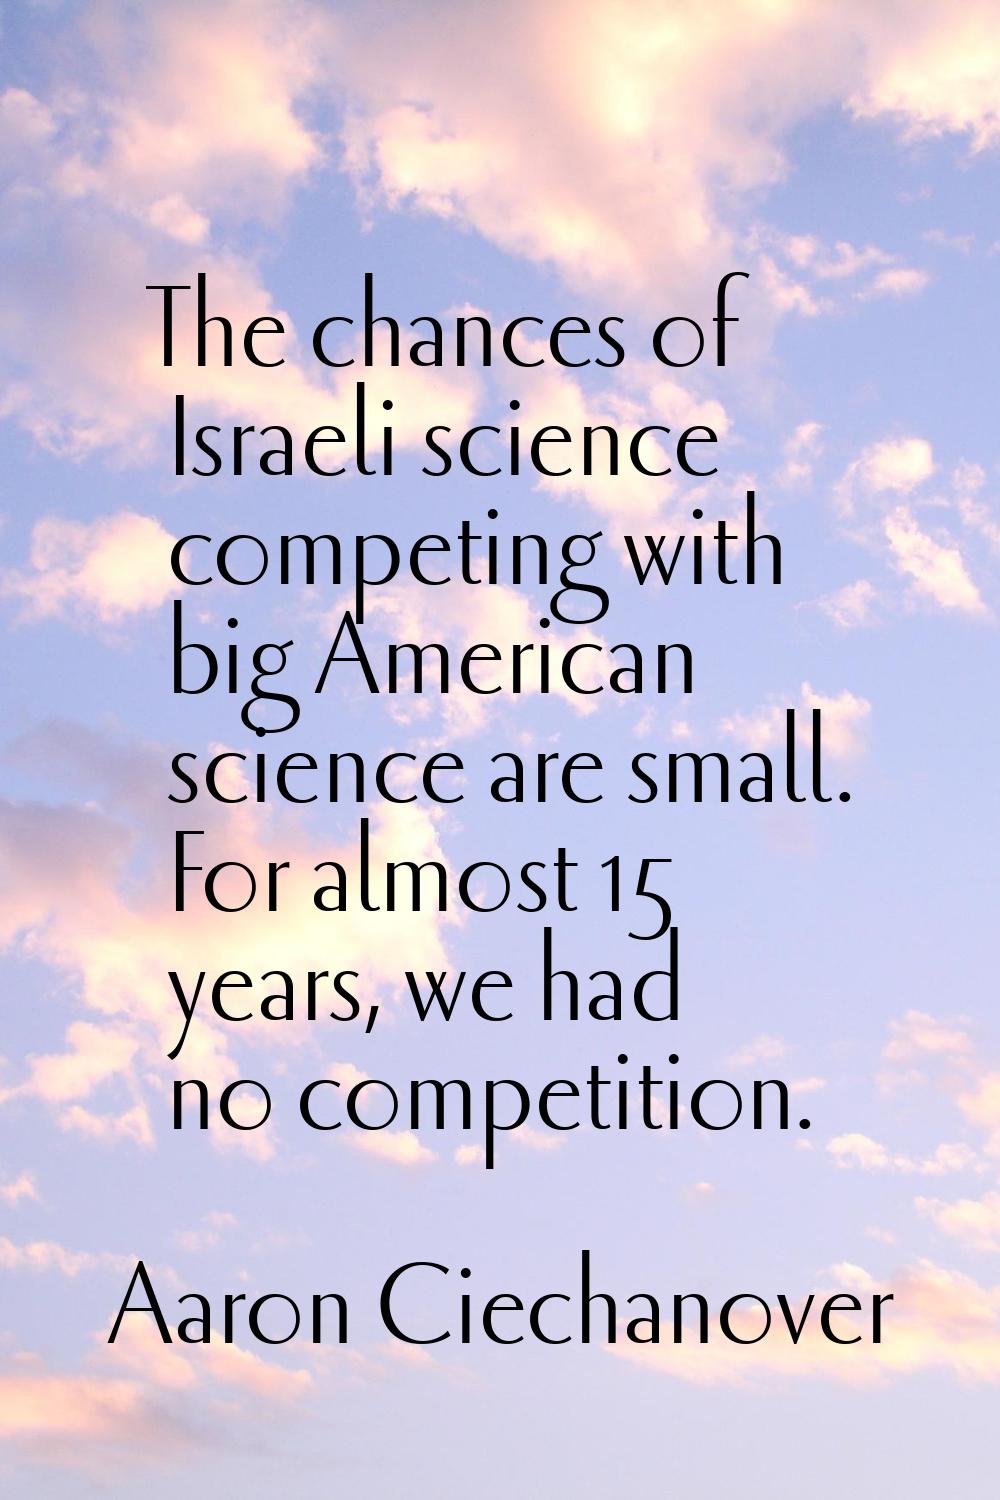 The chances of Israeli science competing with big American science are small. For almost 15 years, 